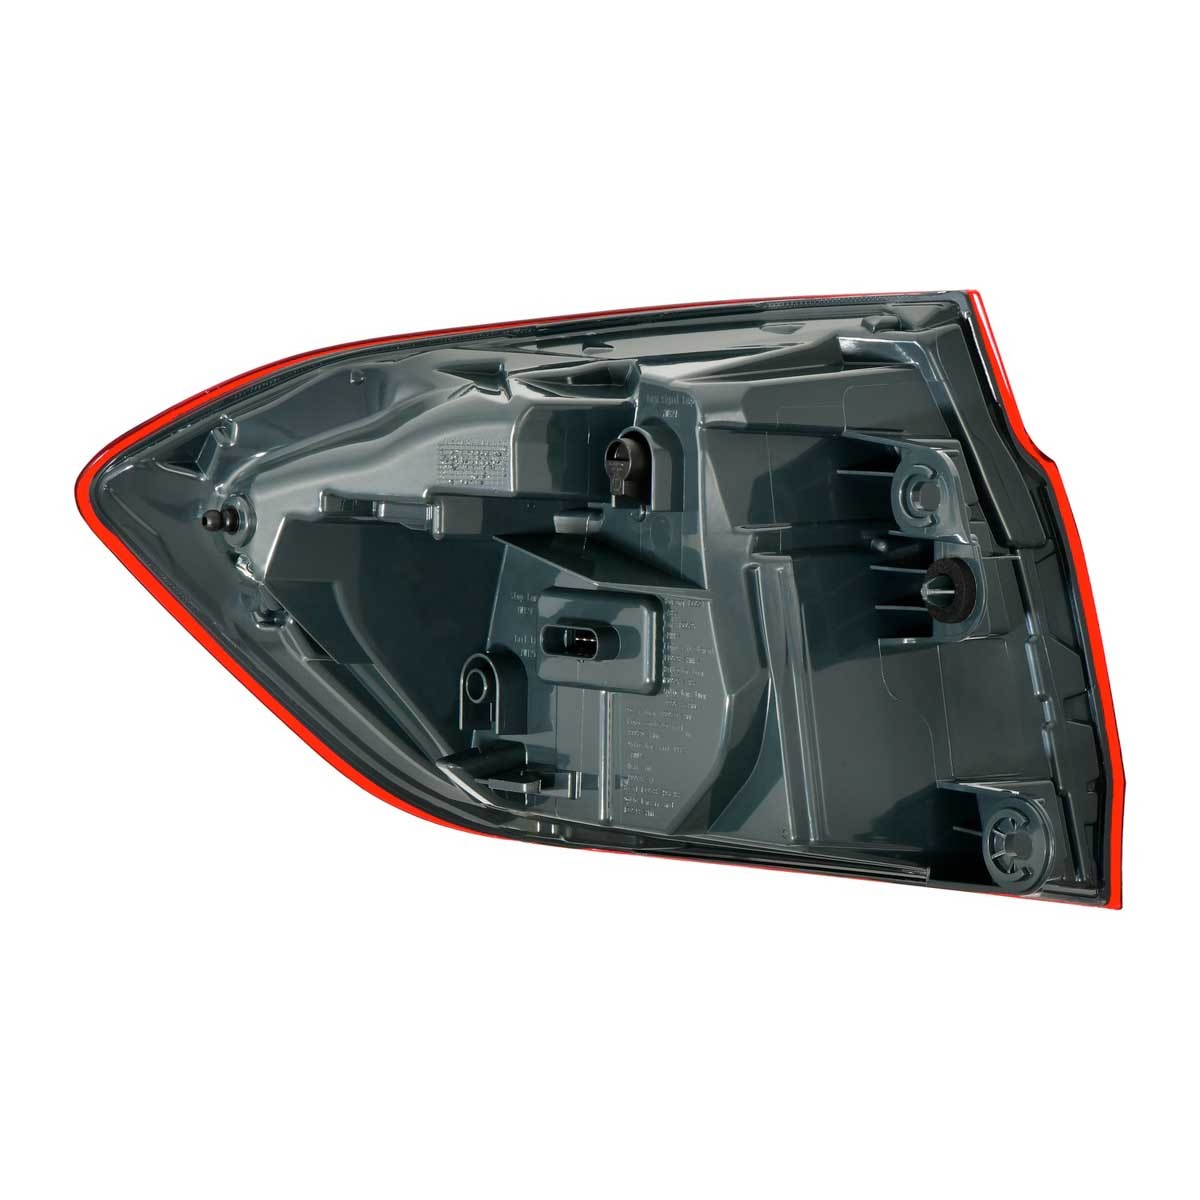 HELLA Tail lights 2SD 012 147-441 for BMW F30